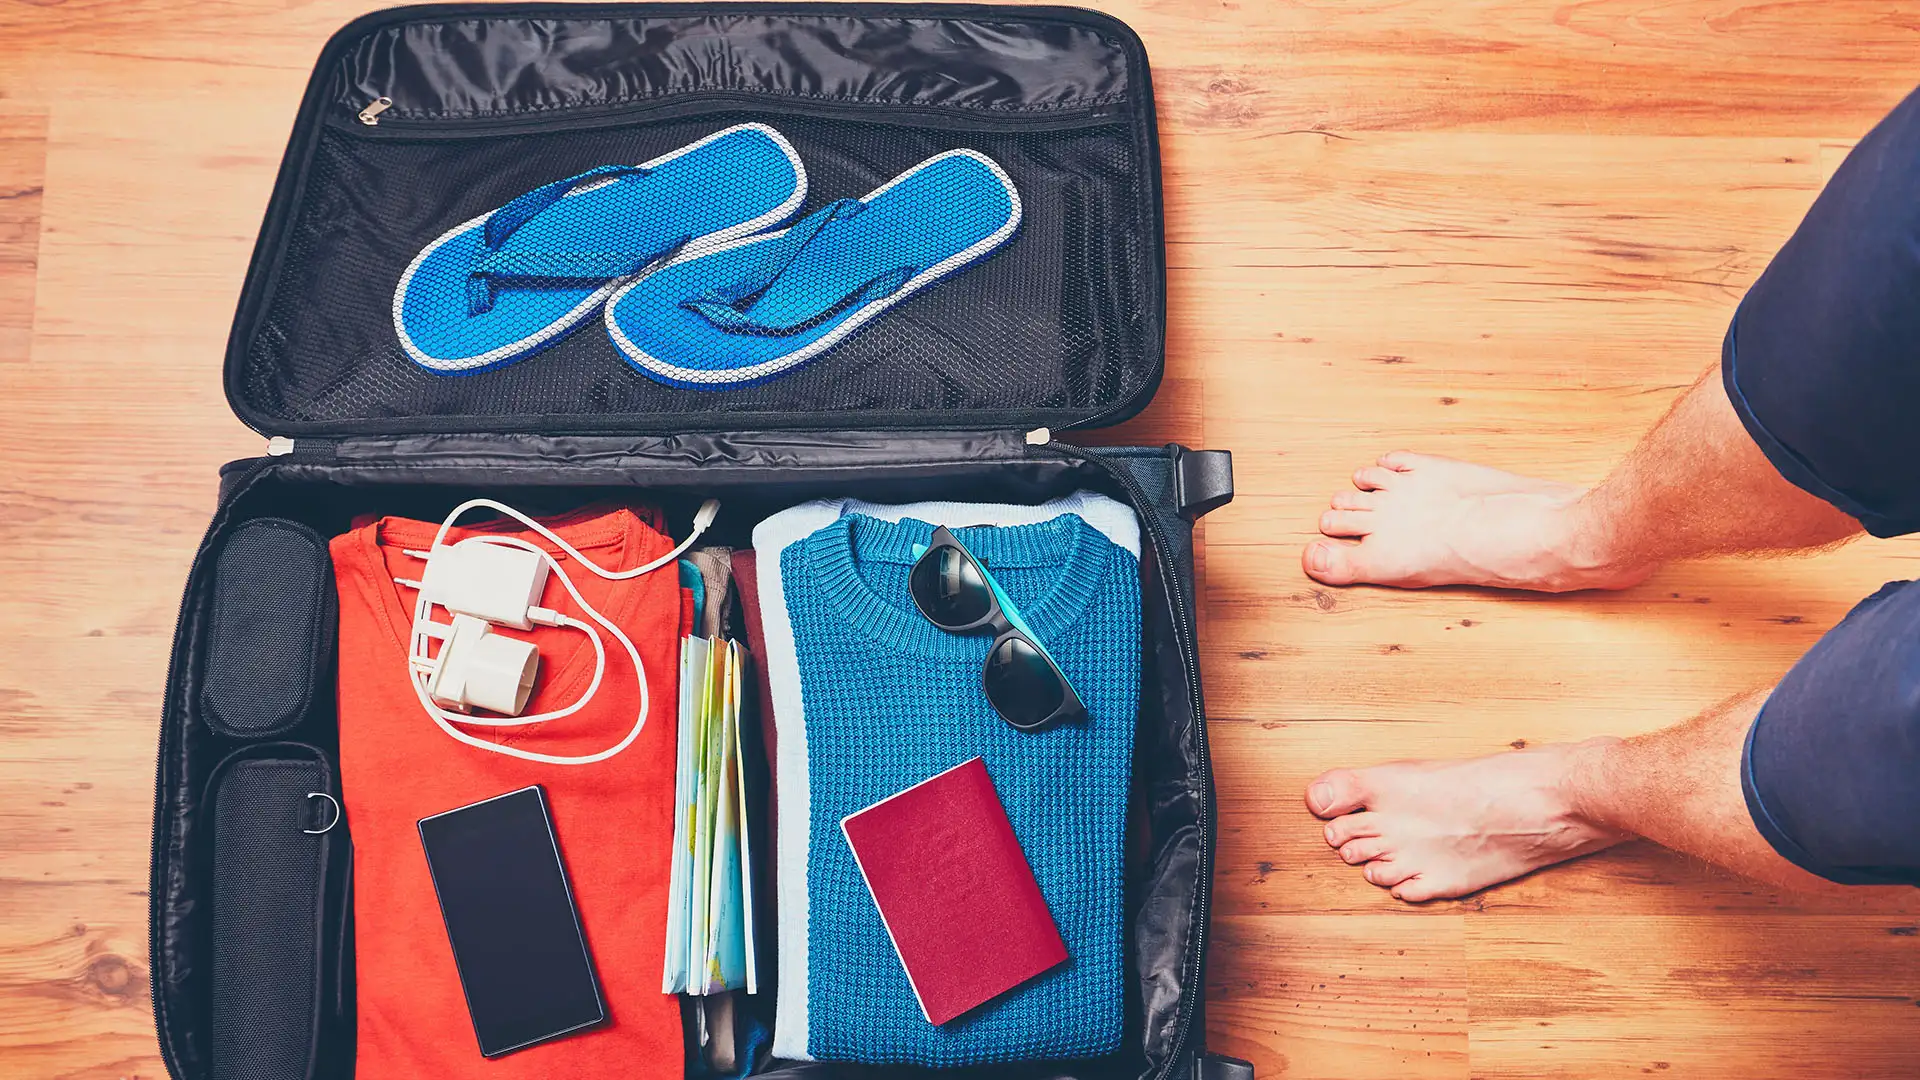 https://www.smartertravel.com/wp-content/webp-express/webp-images/doc-root/wp-content/uploads/2018/12/neatly-packed-suitcase-with-feet.jpg.webp